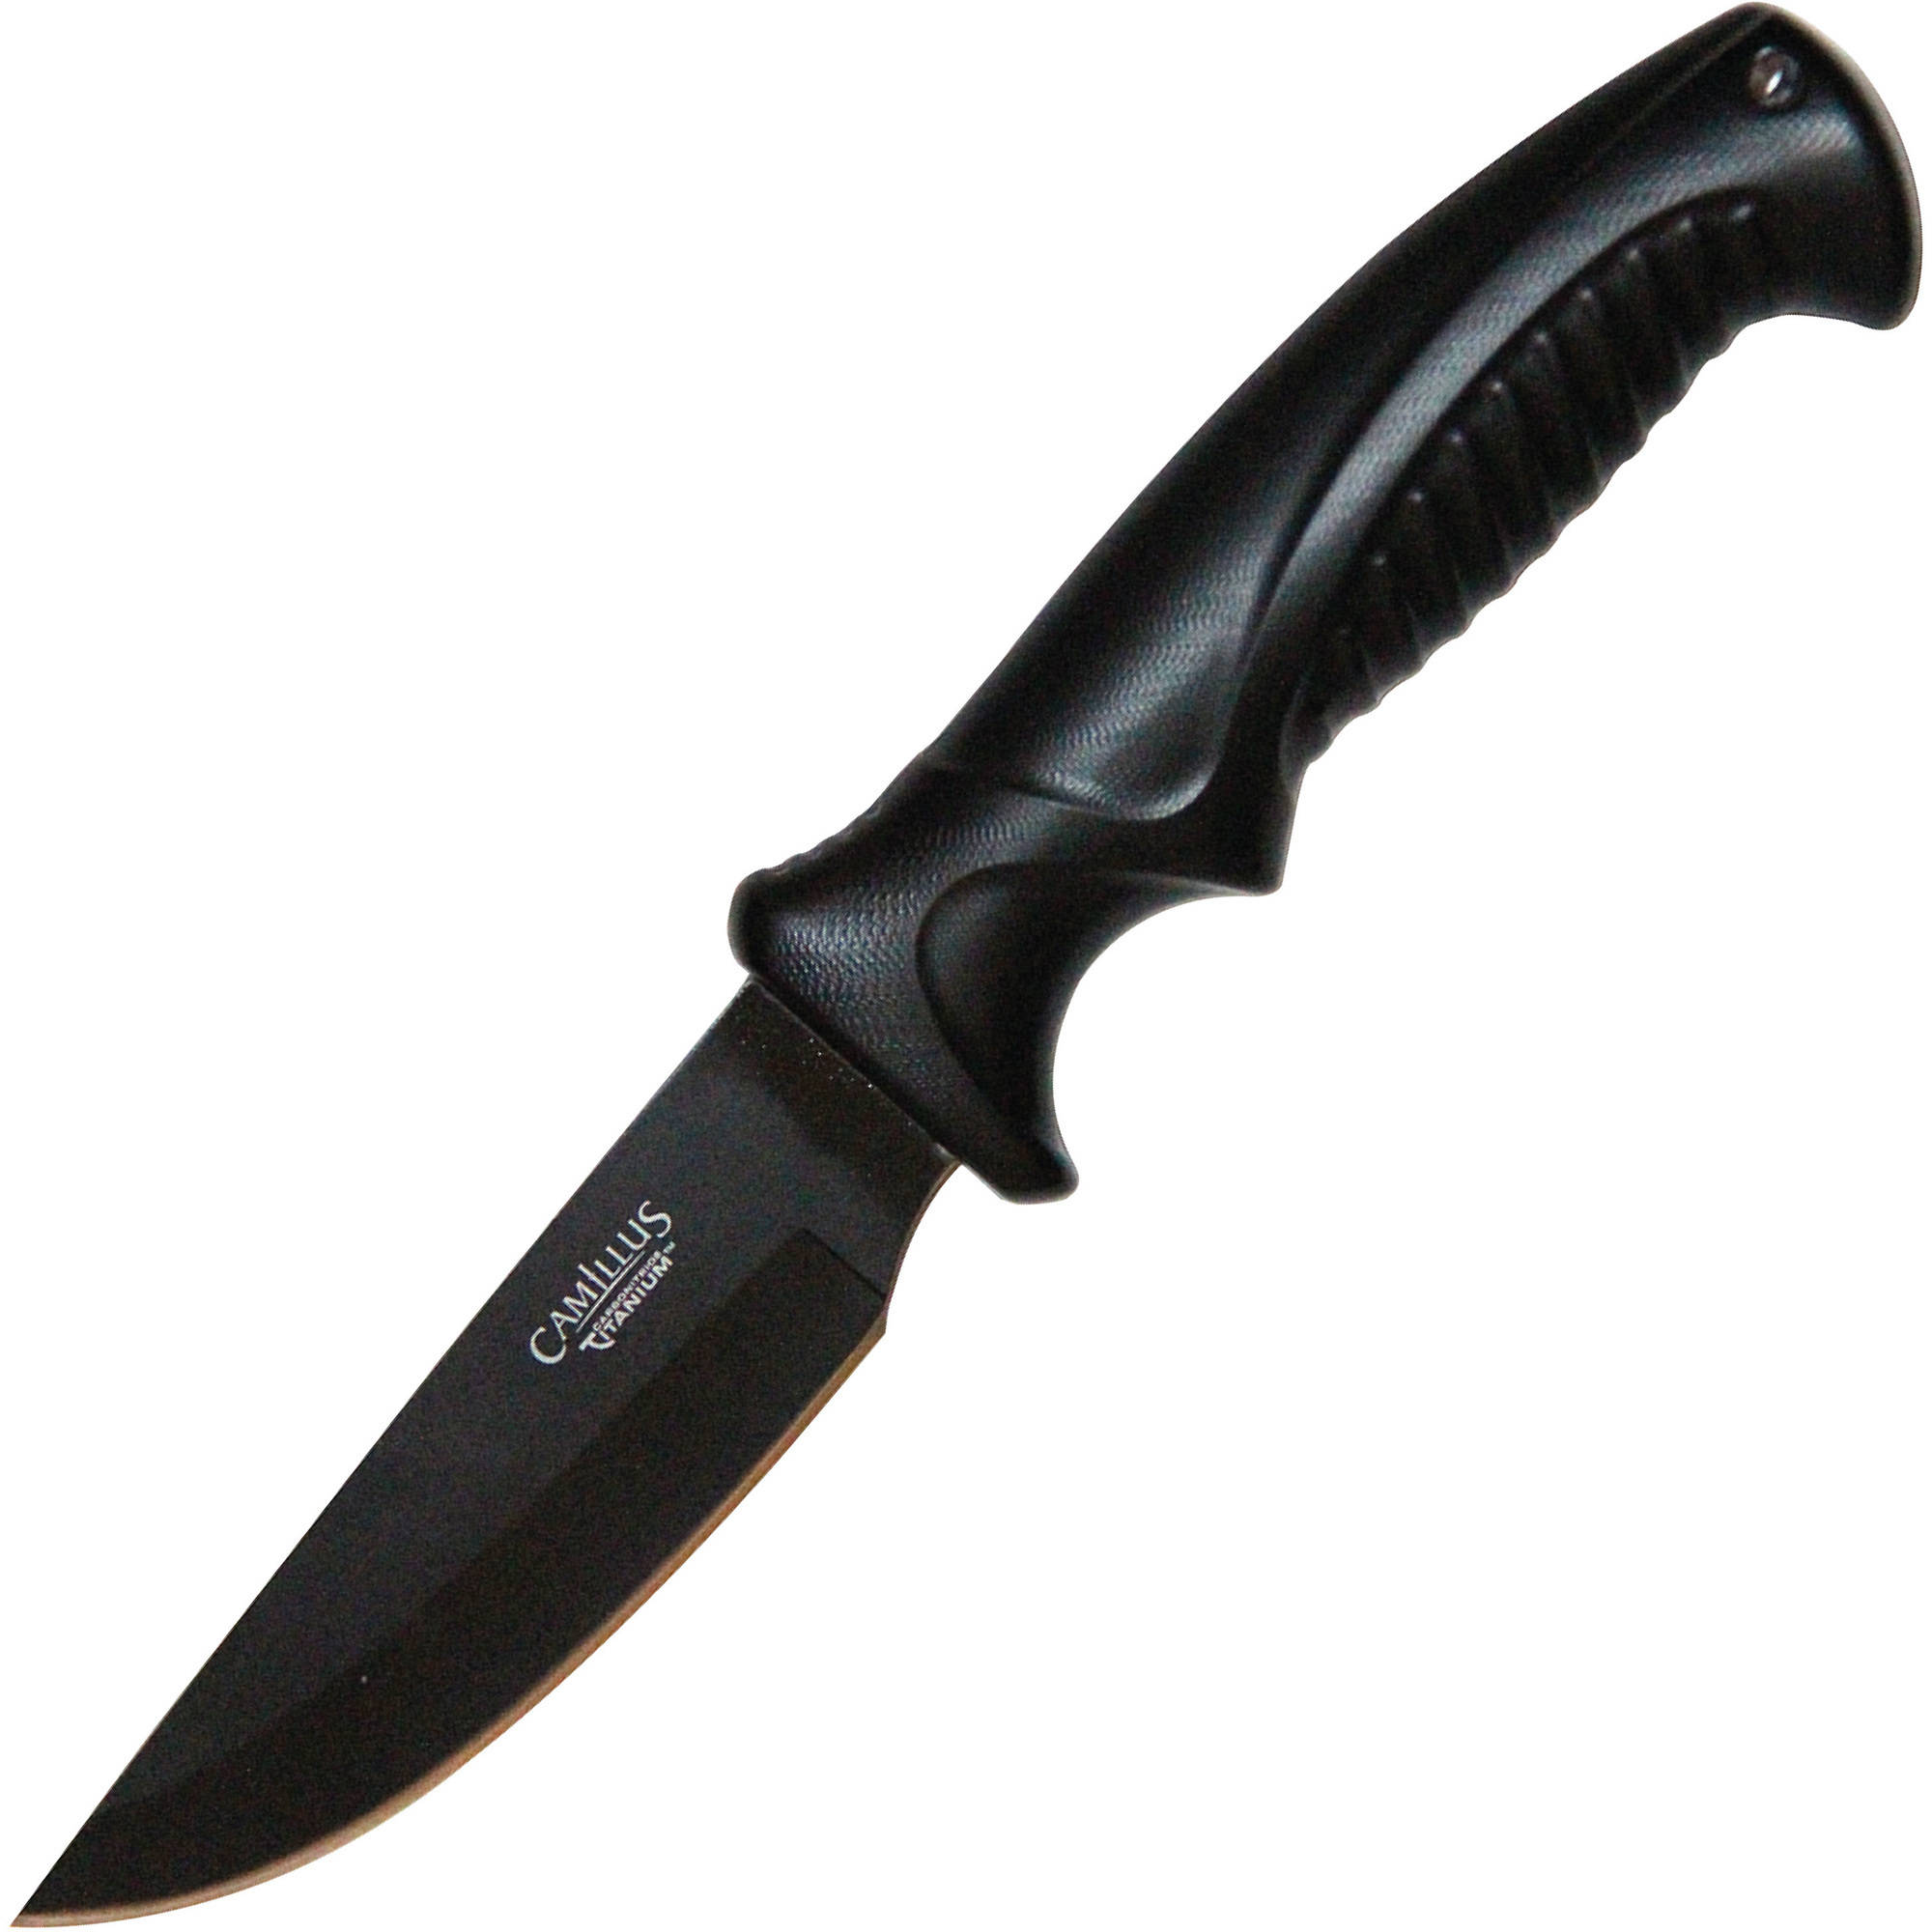 Camillus Titanium Bonded Drop-Point Fixed 4" Blade Knife with Sheath - image 1 of 2